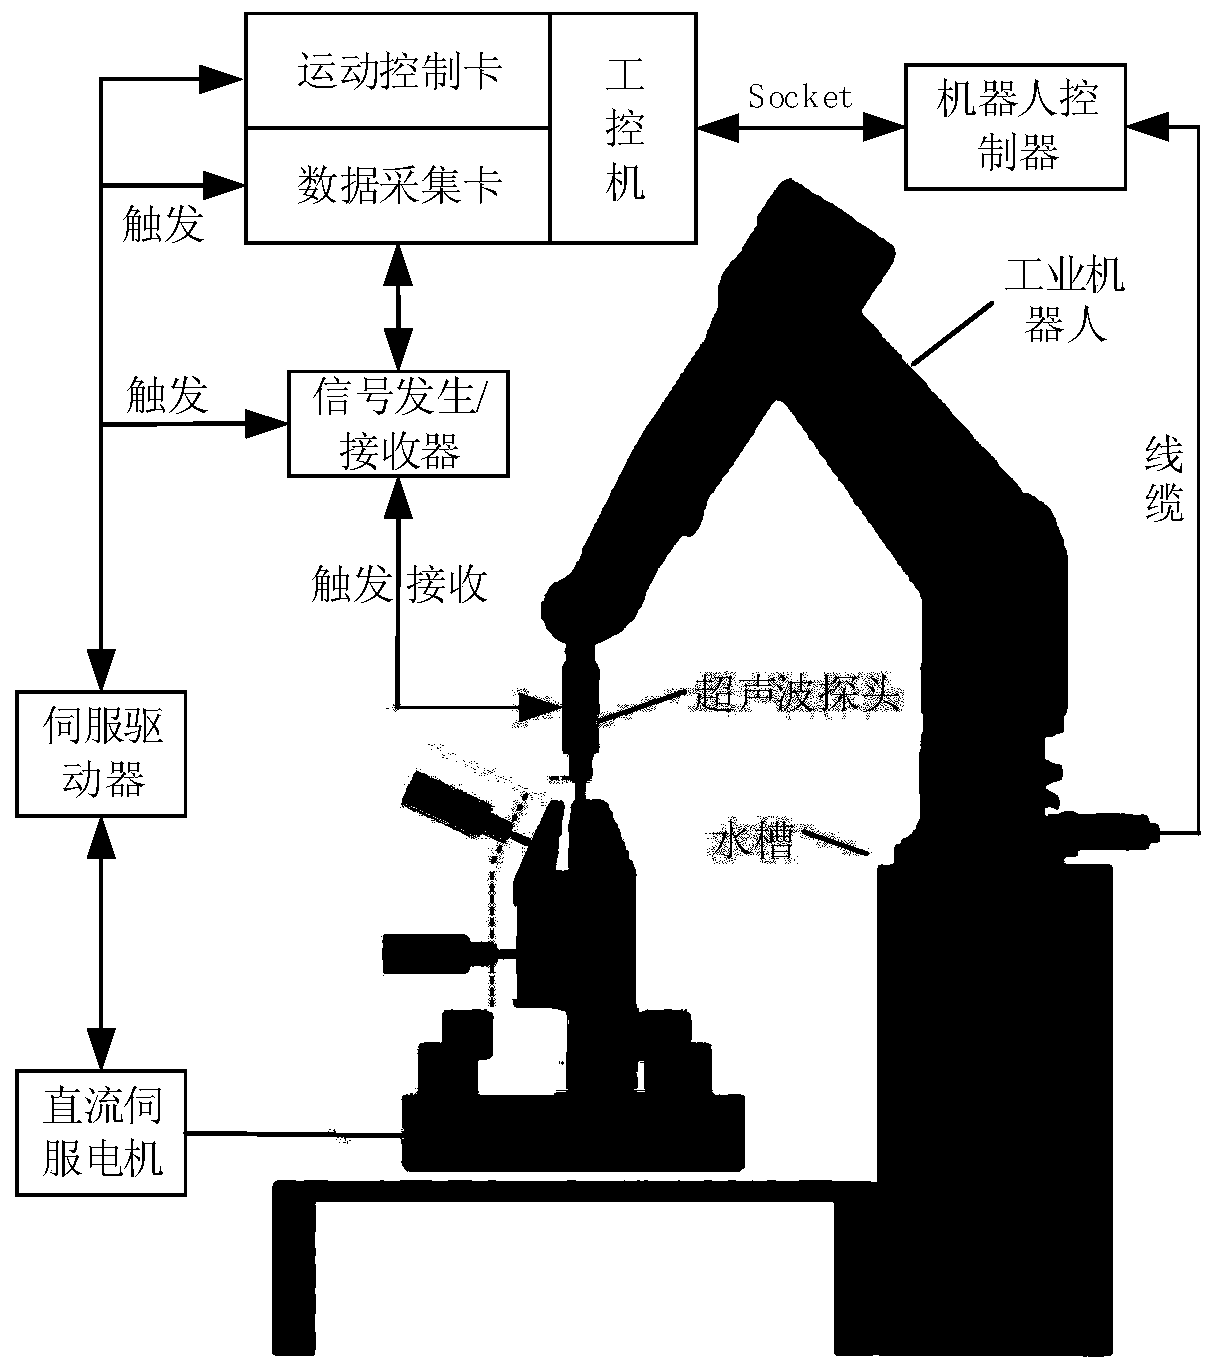 An Ultrasonic Automatic Inspection Method Considering Workpiece Clamping Error Correction